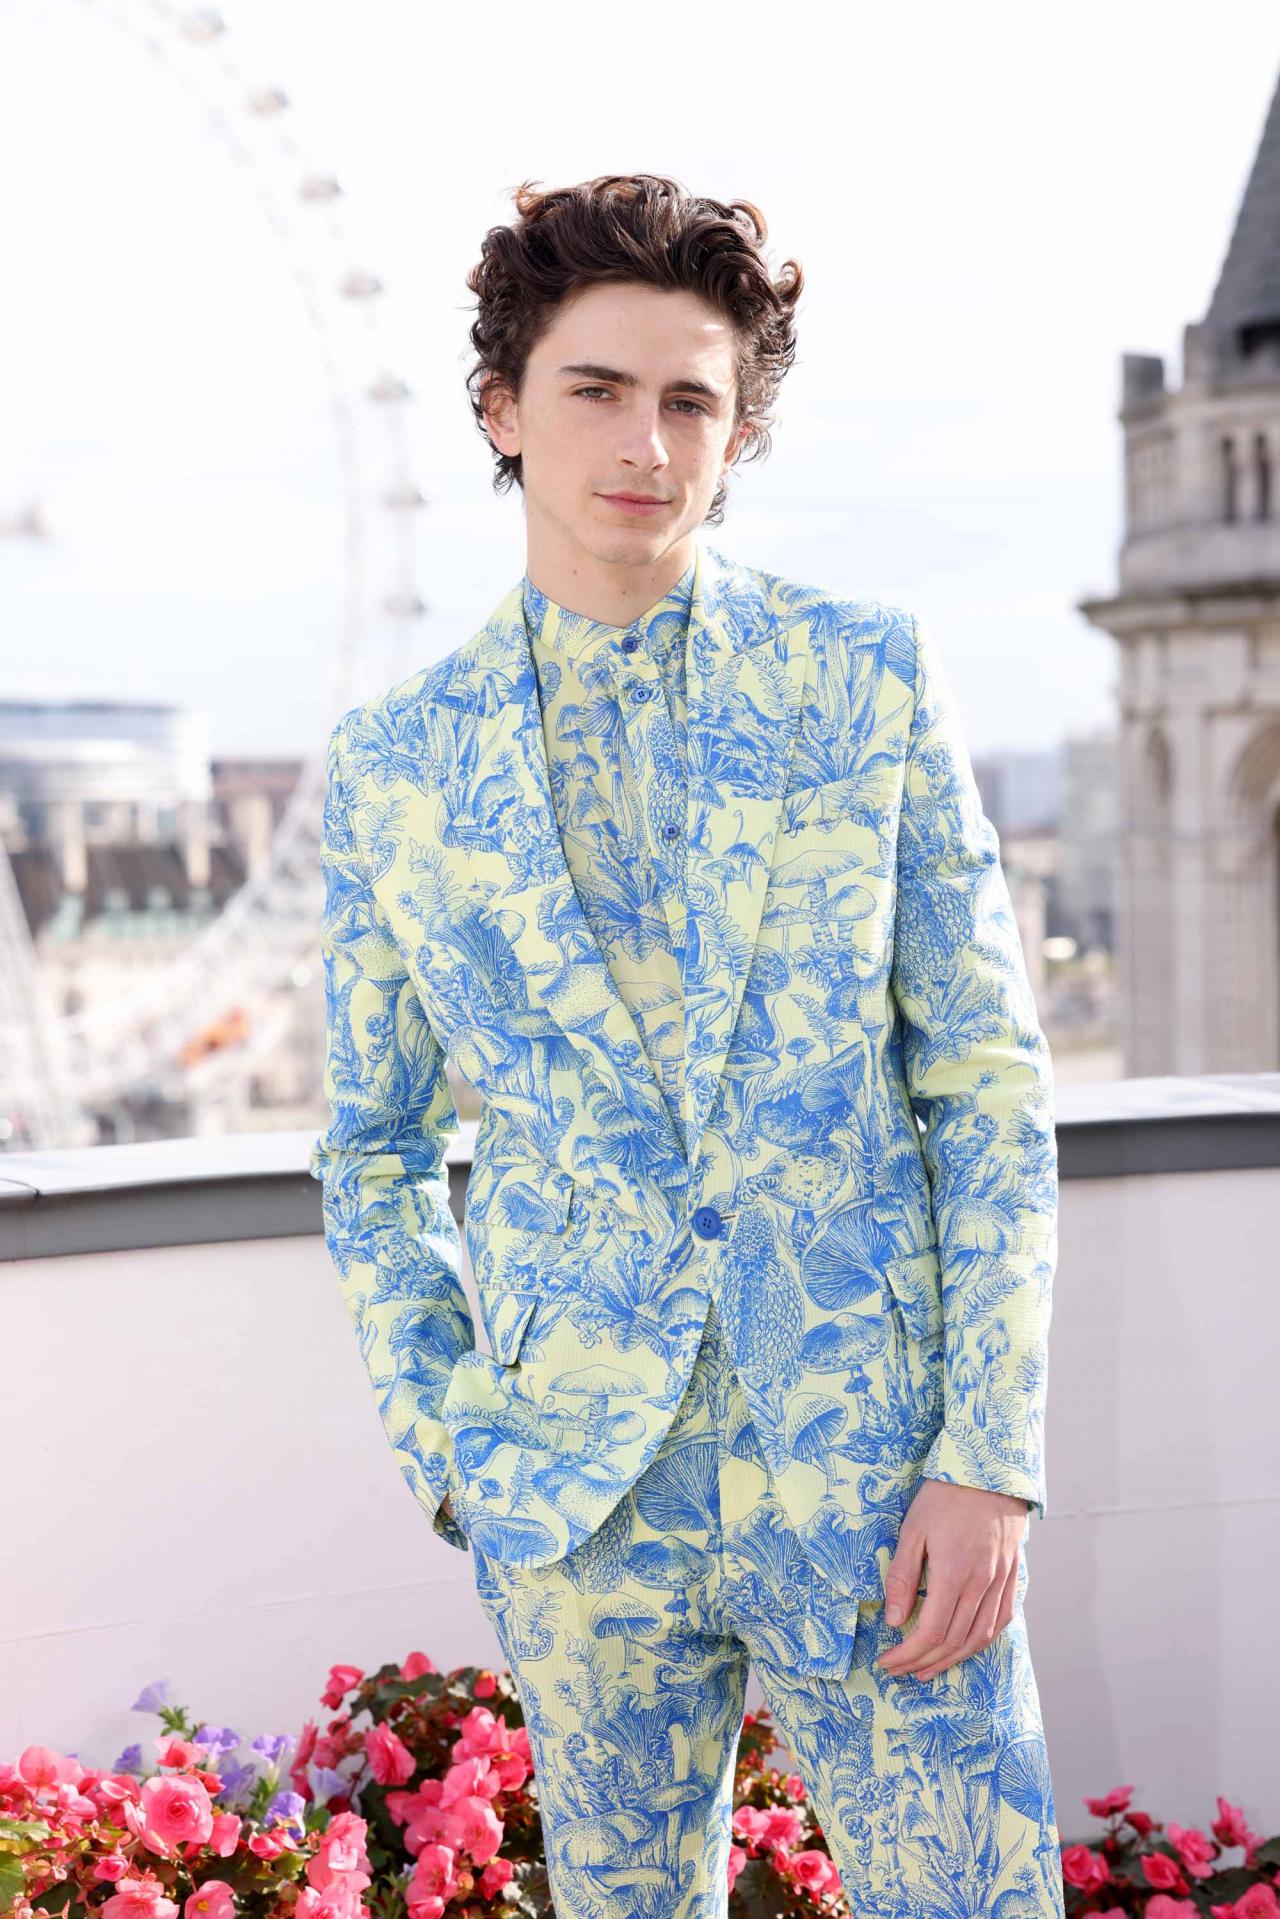 LONDON, ENGLAND - OCTOBER 17: Timothée Chalamet attends the Dune Photocall in London ahead of the film's release on 21st October in central London on October 17, 2021 in London, England. (Photo by Tim P. Whitby/Getty Images for Warner Bros. Pictures and Legendary Pictures)